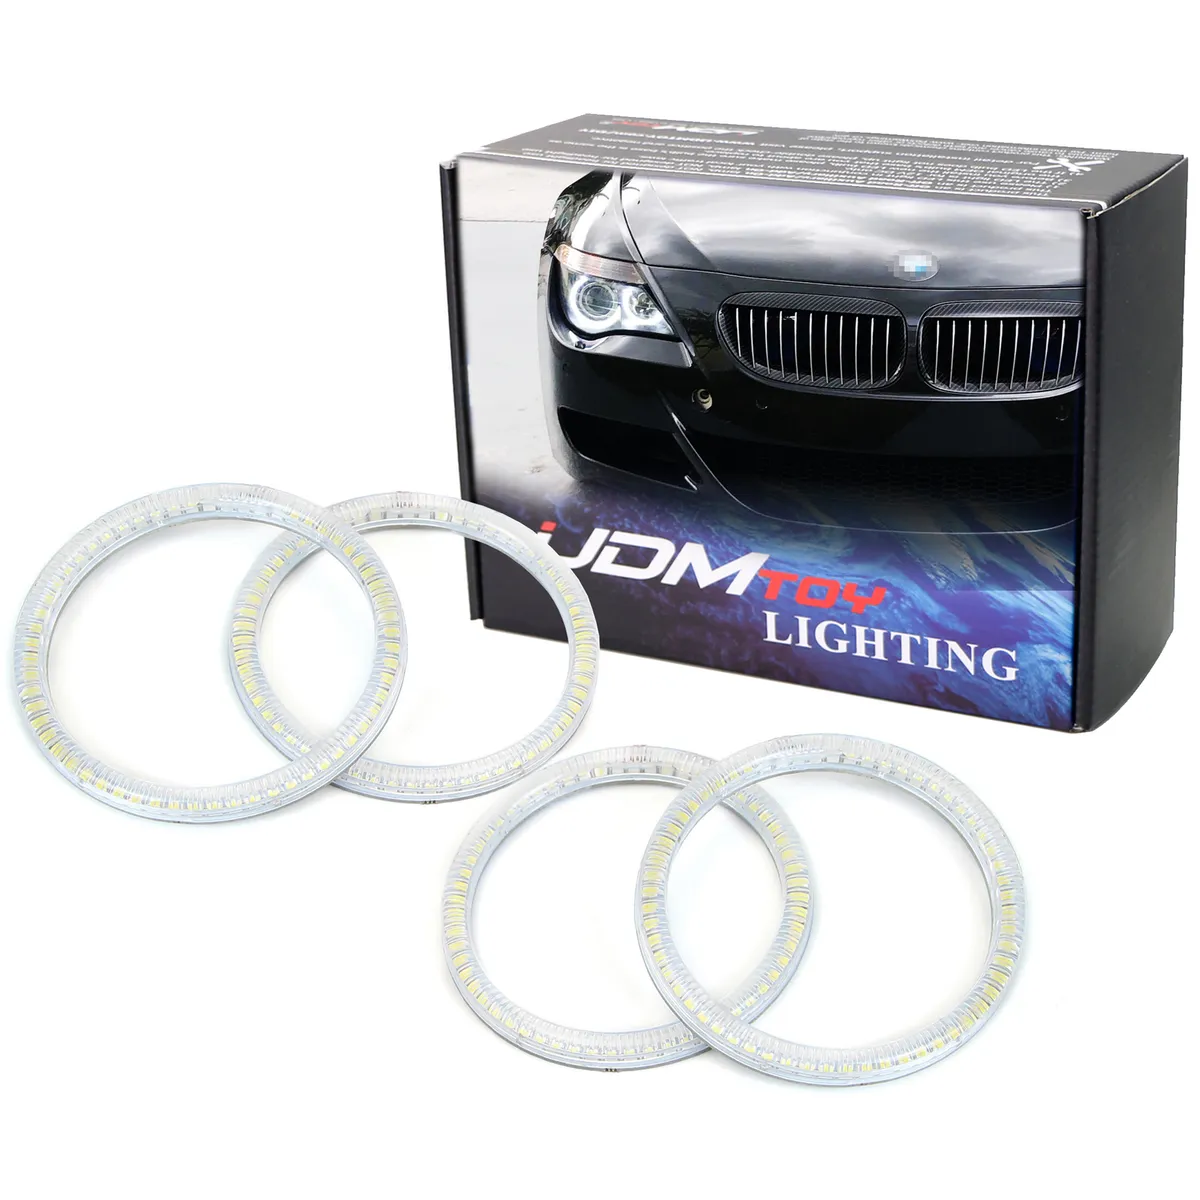 Universal Angel Eye Ring ⭕ Red / Blue With Cotton Plastic Cover LED for Car  Headlight #ringlight - YouTube